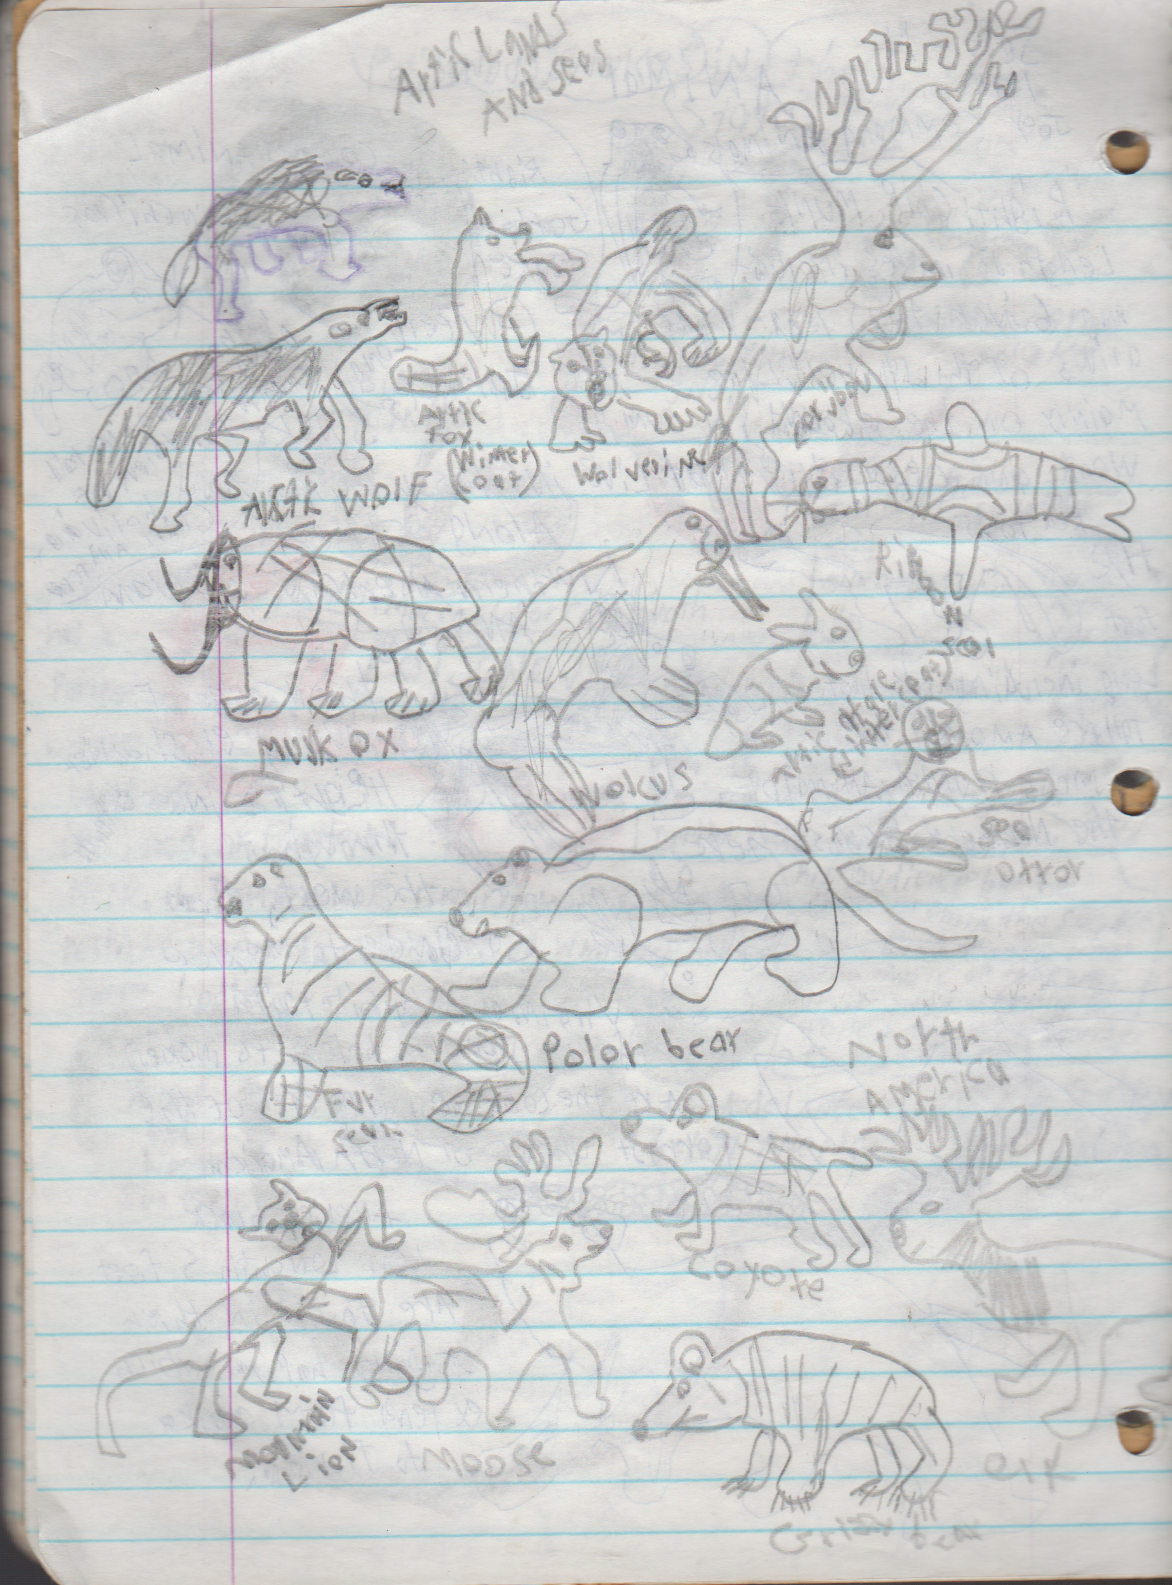 1996-08-18 - Saturday - 11 yr old Joey Arnold's School Book, dates through to 1998 apx, mostly 96, Writings, Drawings, Etc-006.png